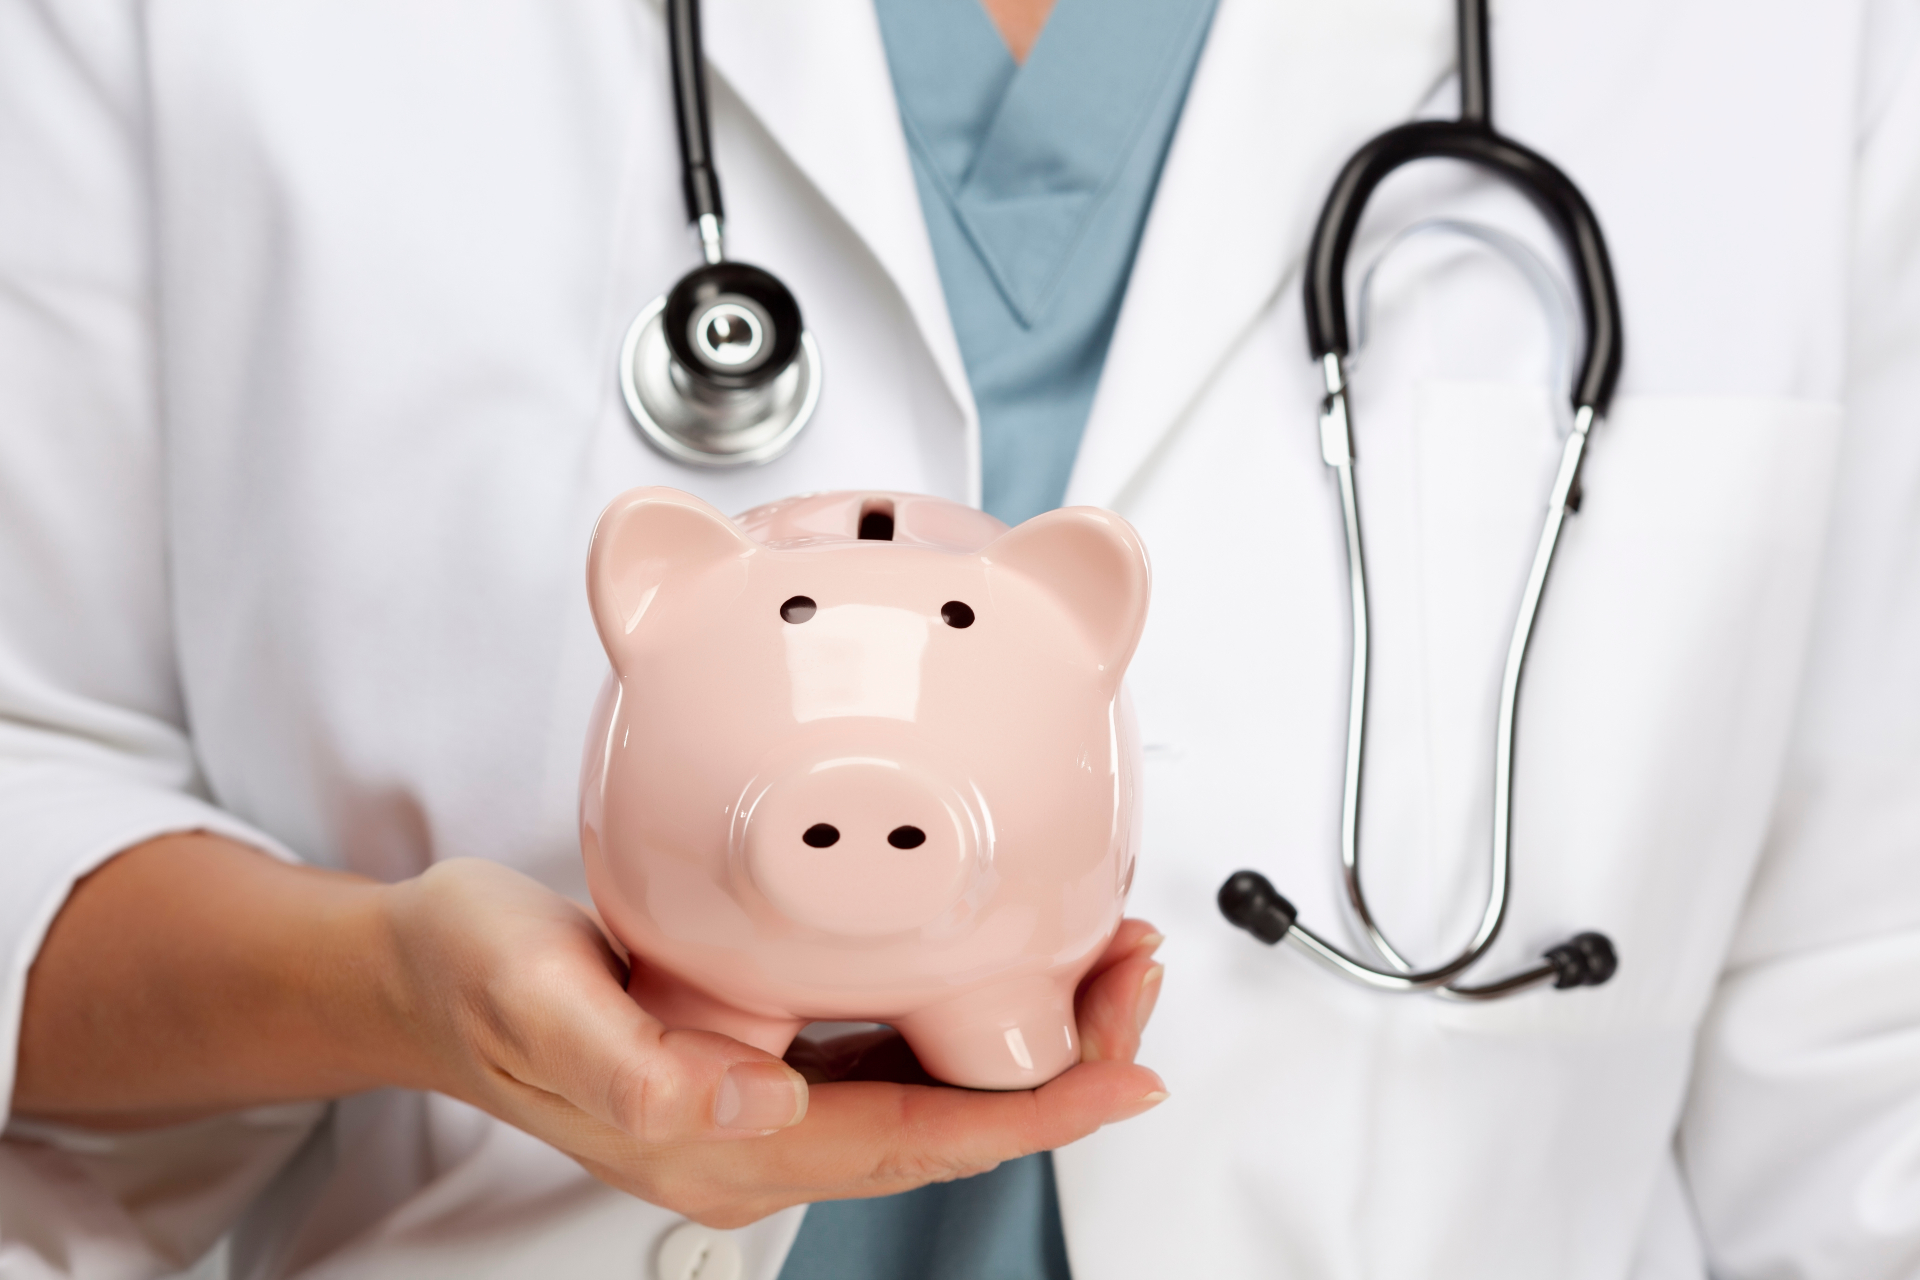 How a Top Health Plan Used AI to Achieve a 34% Increase in Cost Savings